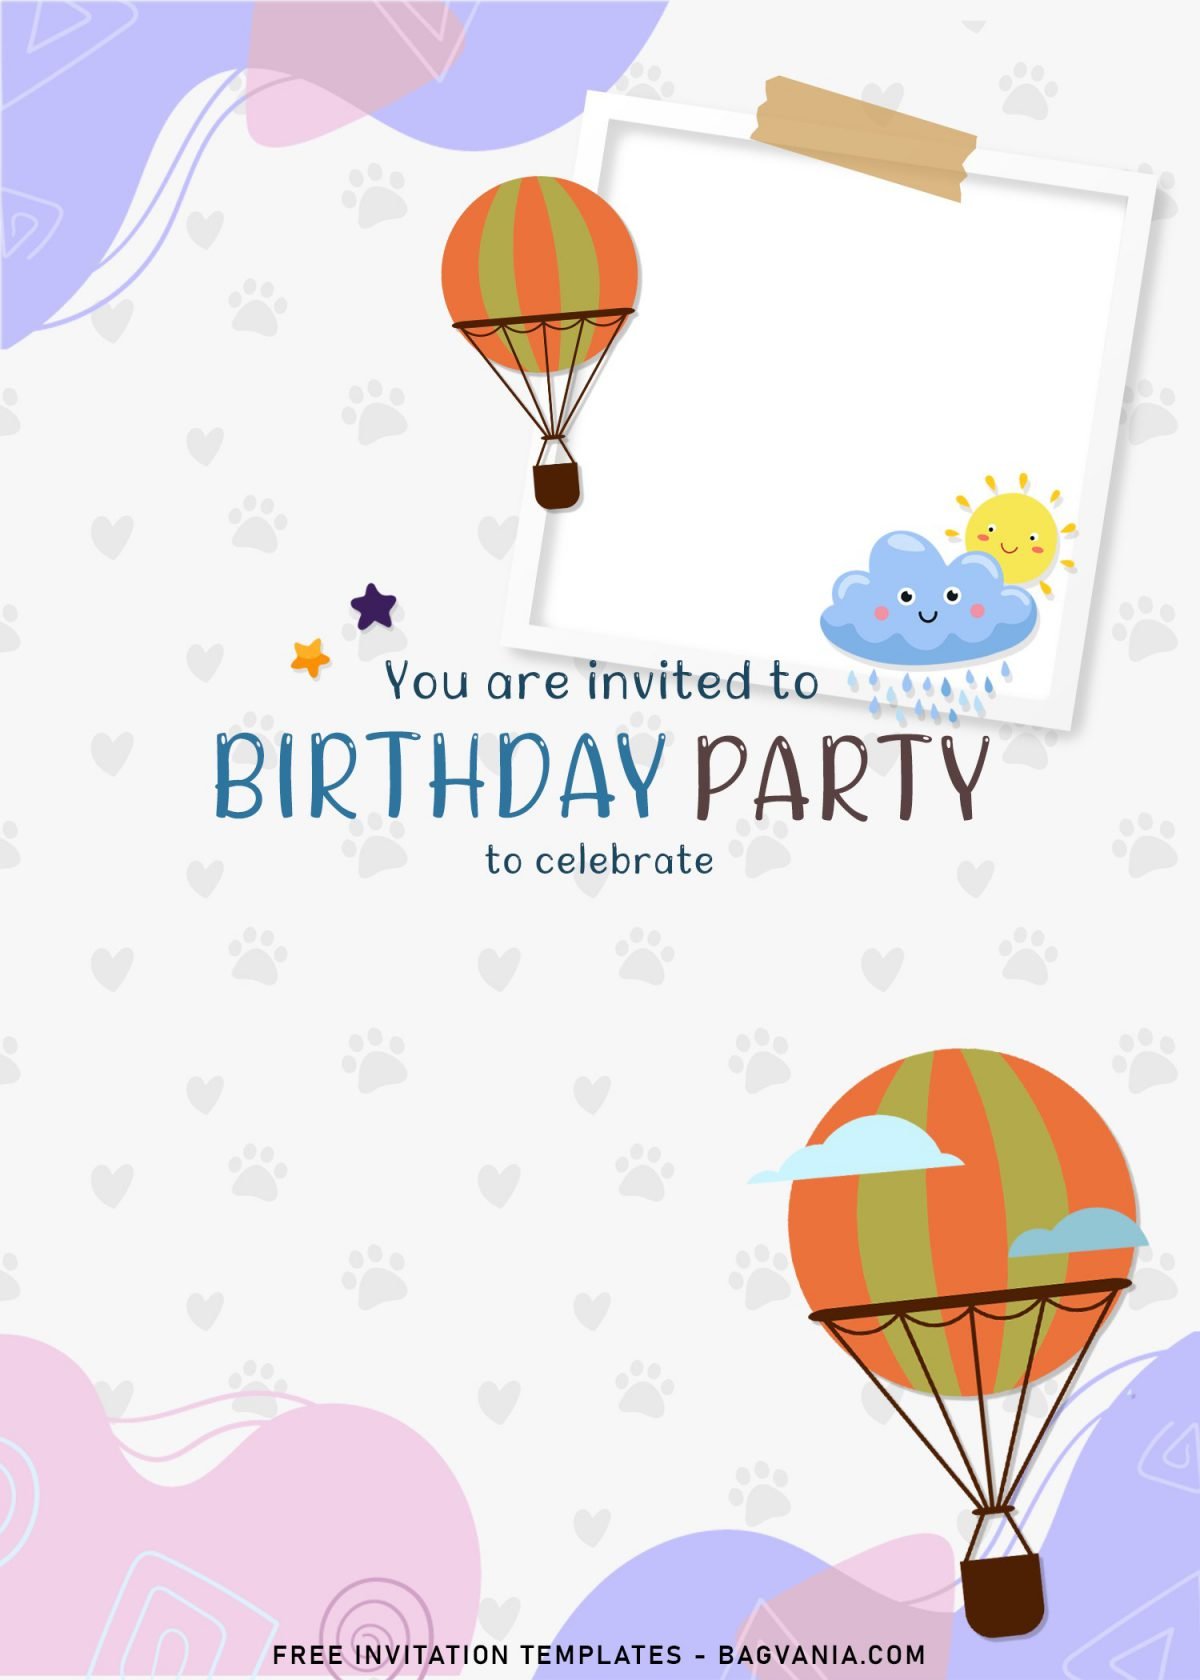 8+ Colorful Hand Drawn Birthday Invitation Templates For Your Kid's Birthday and has 